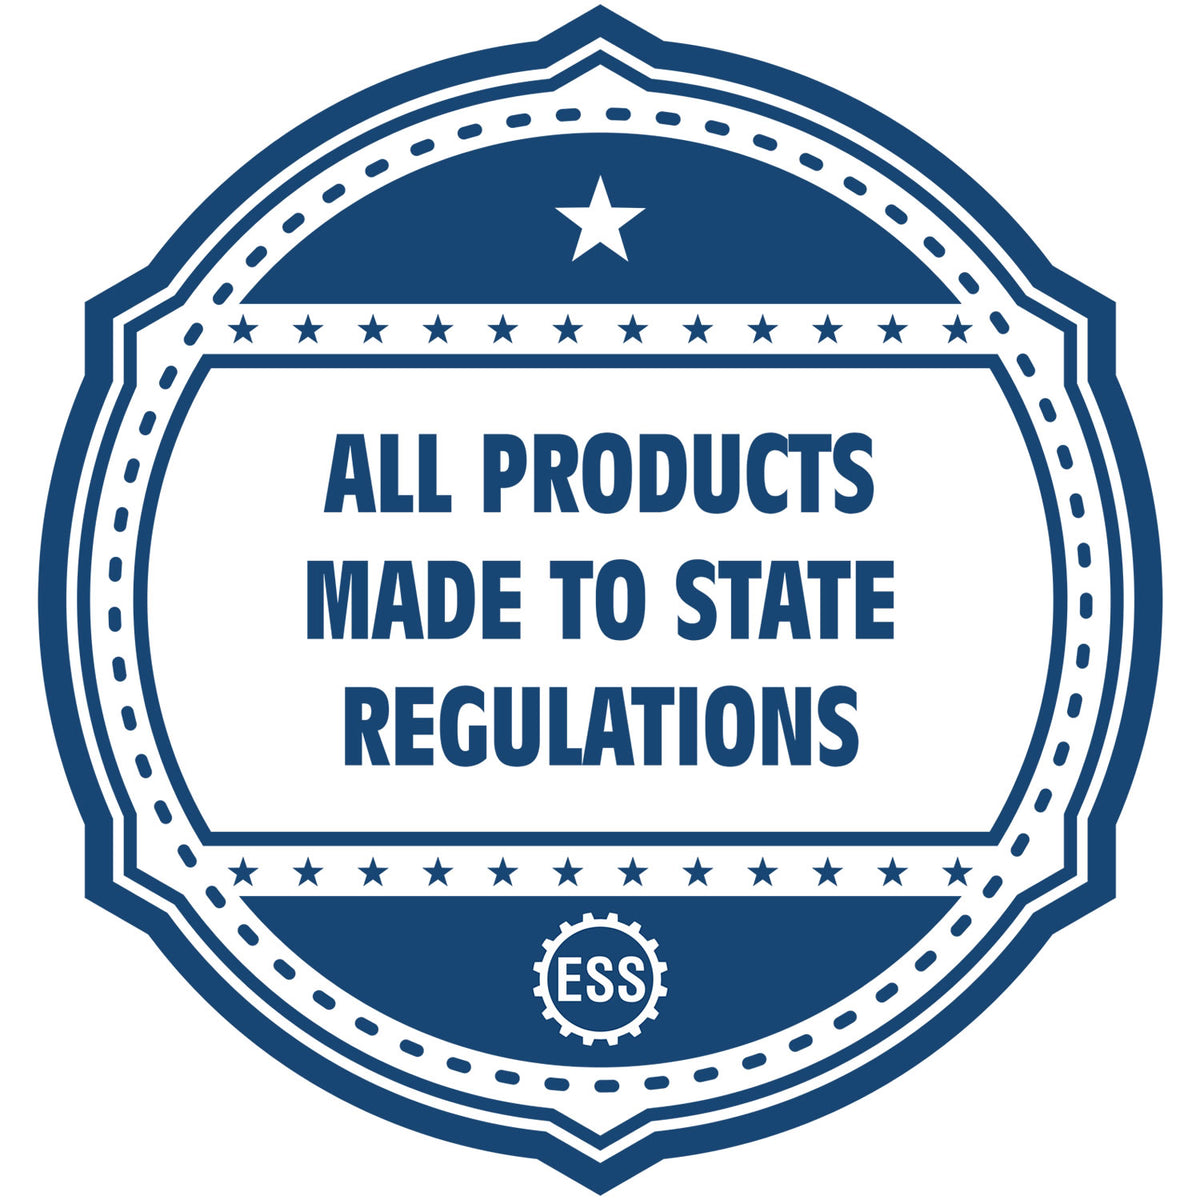 An icon or badge element for the State of Alabama Long Reach Architectural Embossing Seal showing that this product is made in compliance with state regulations.